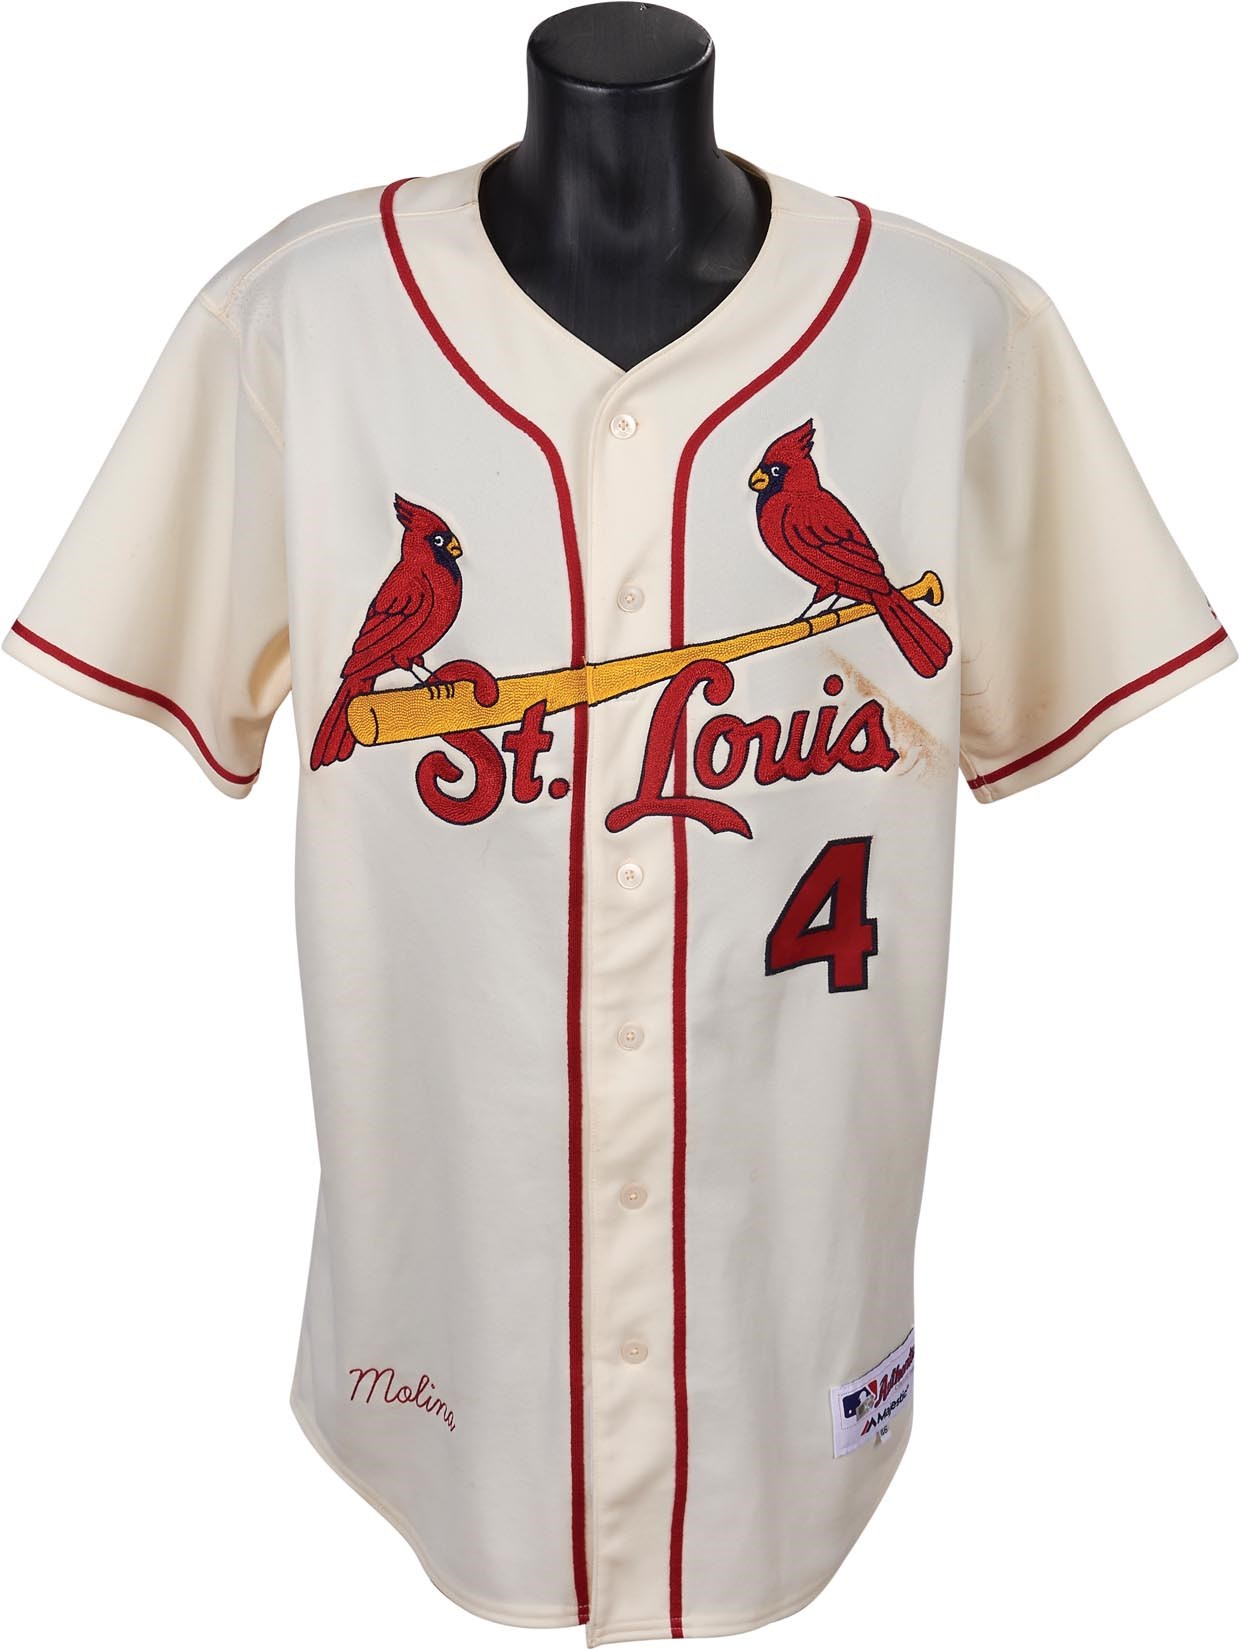 - 2016 Yadier Molina Game Worn 1,500th Career Hit Jersey (MLB Auth. & Photo-Matched)